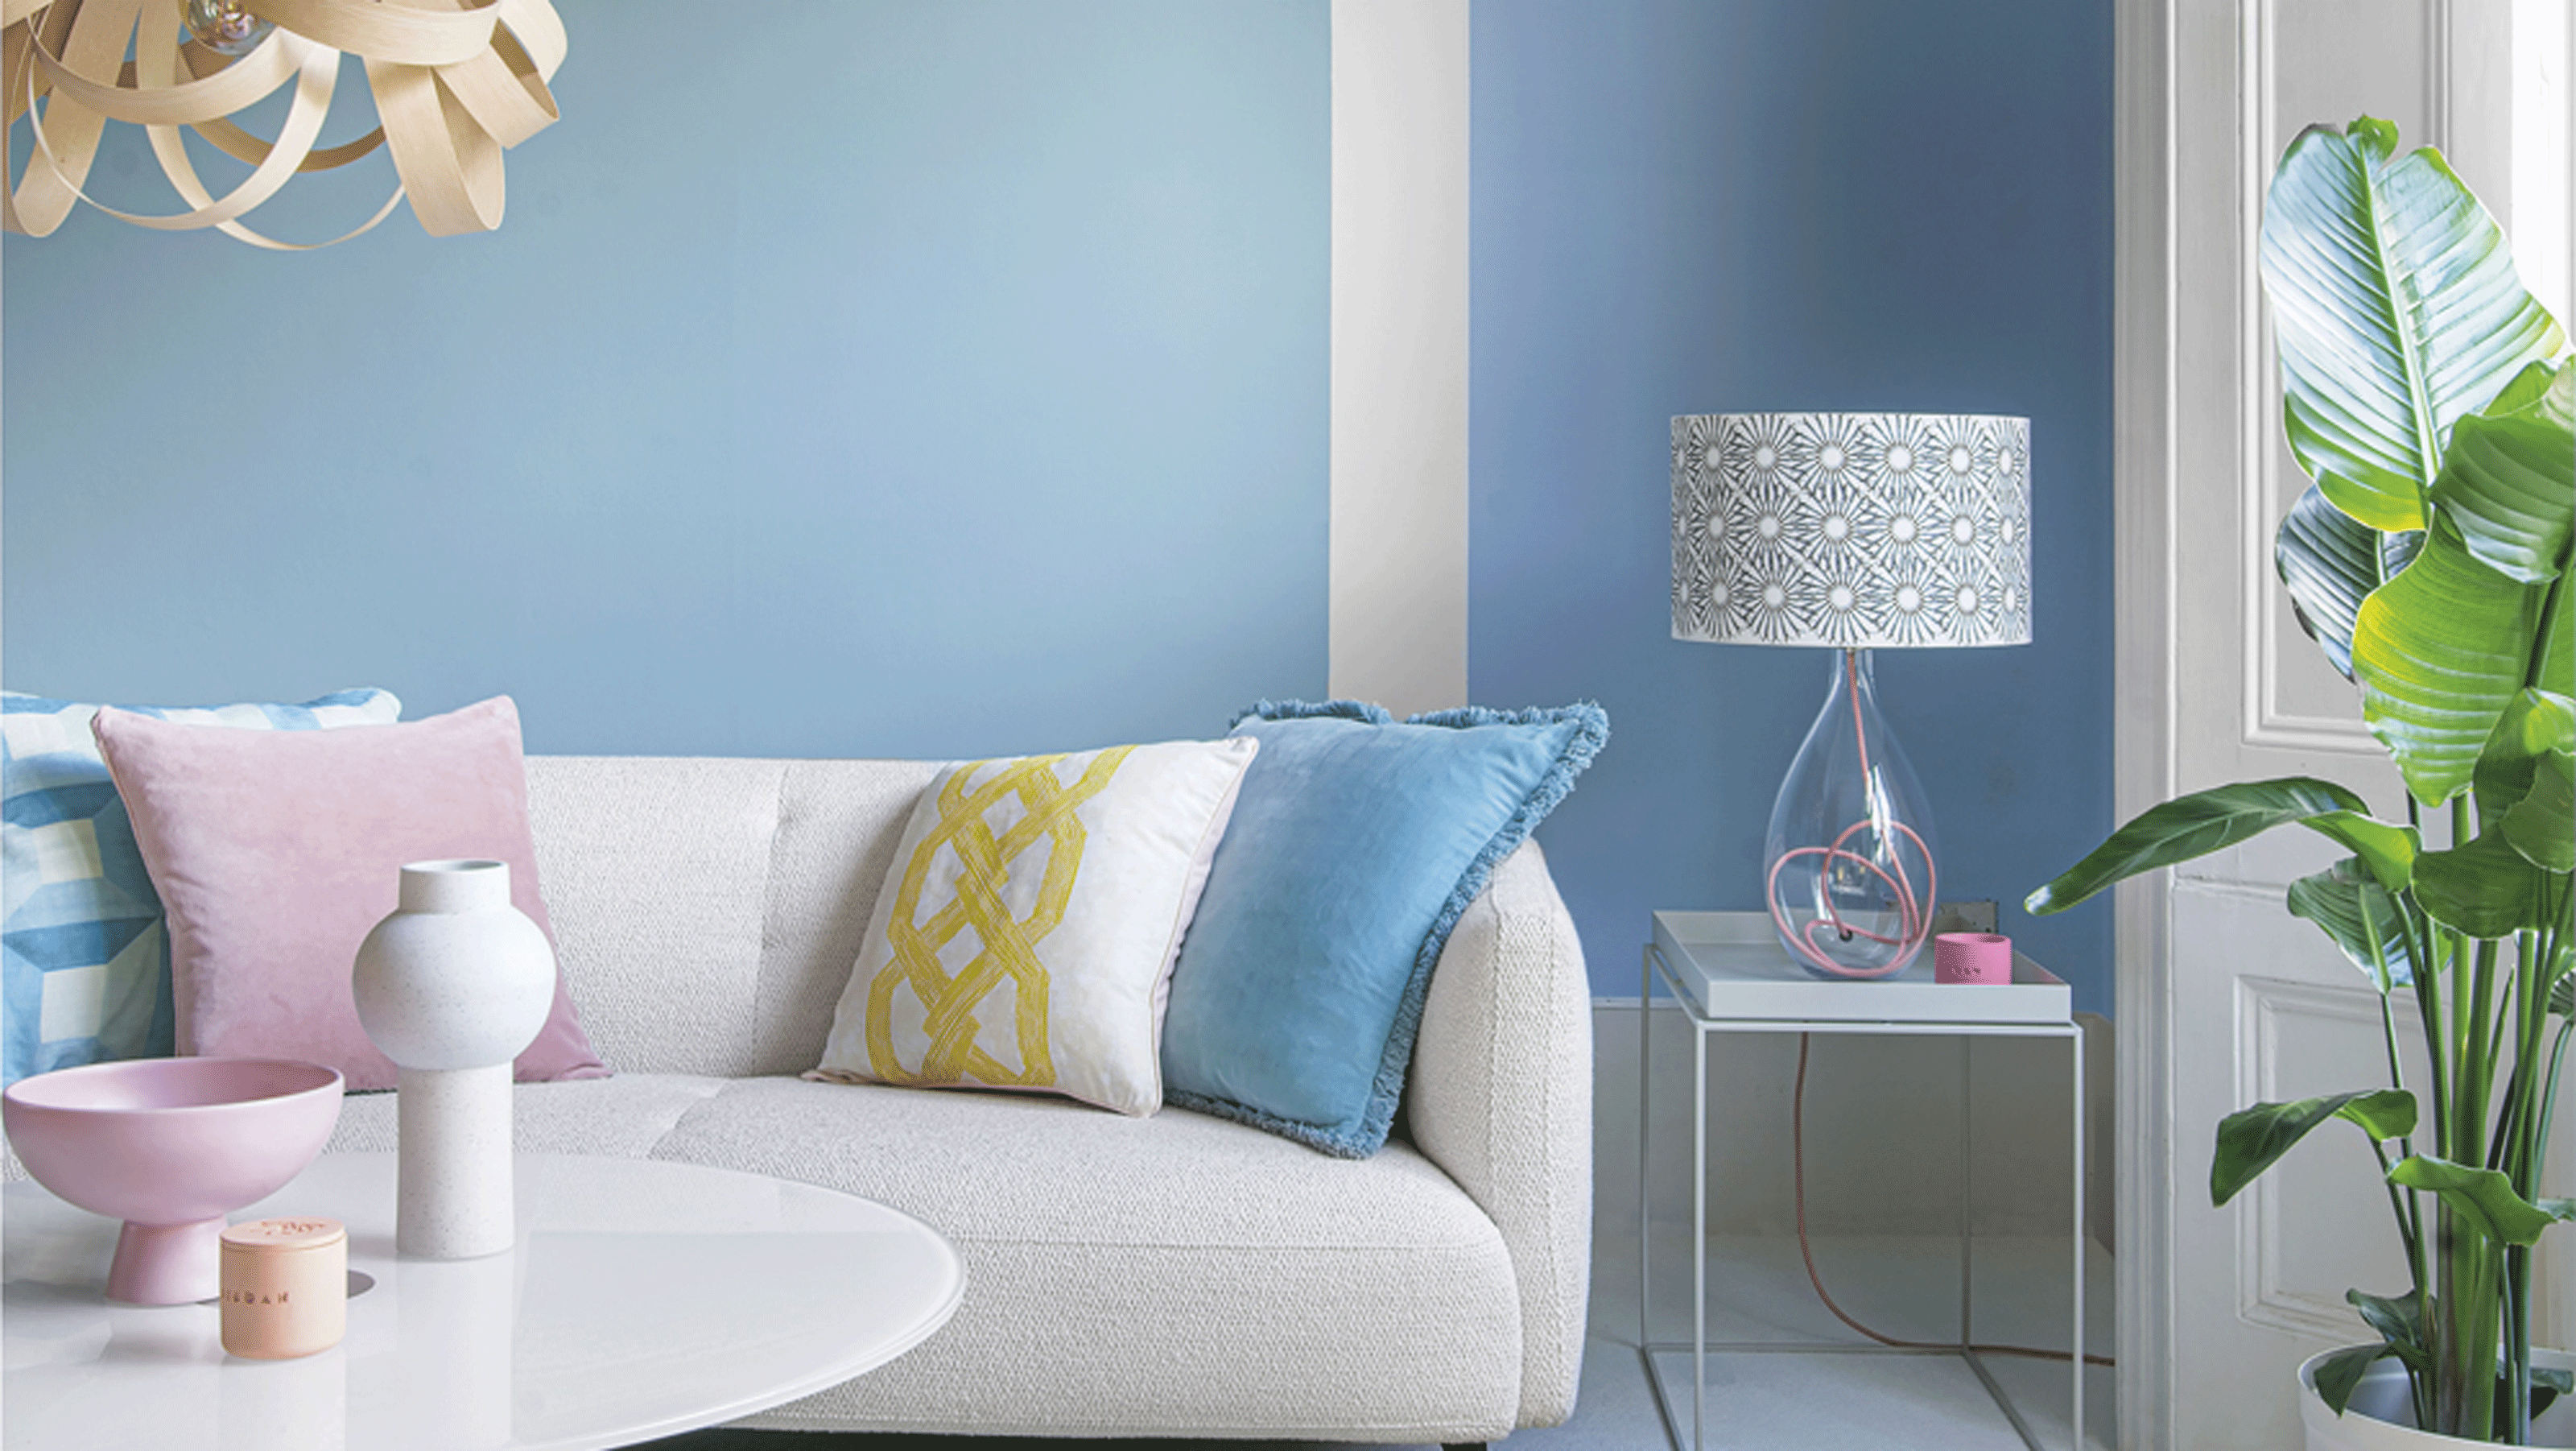 Living room paint ideas to transform your space with colour | Ideal Home